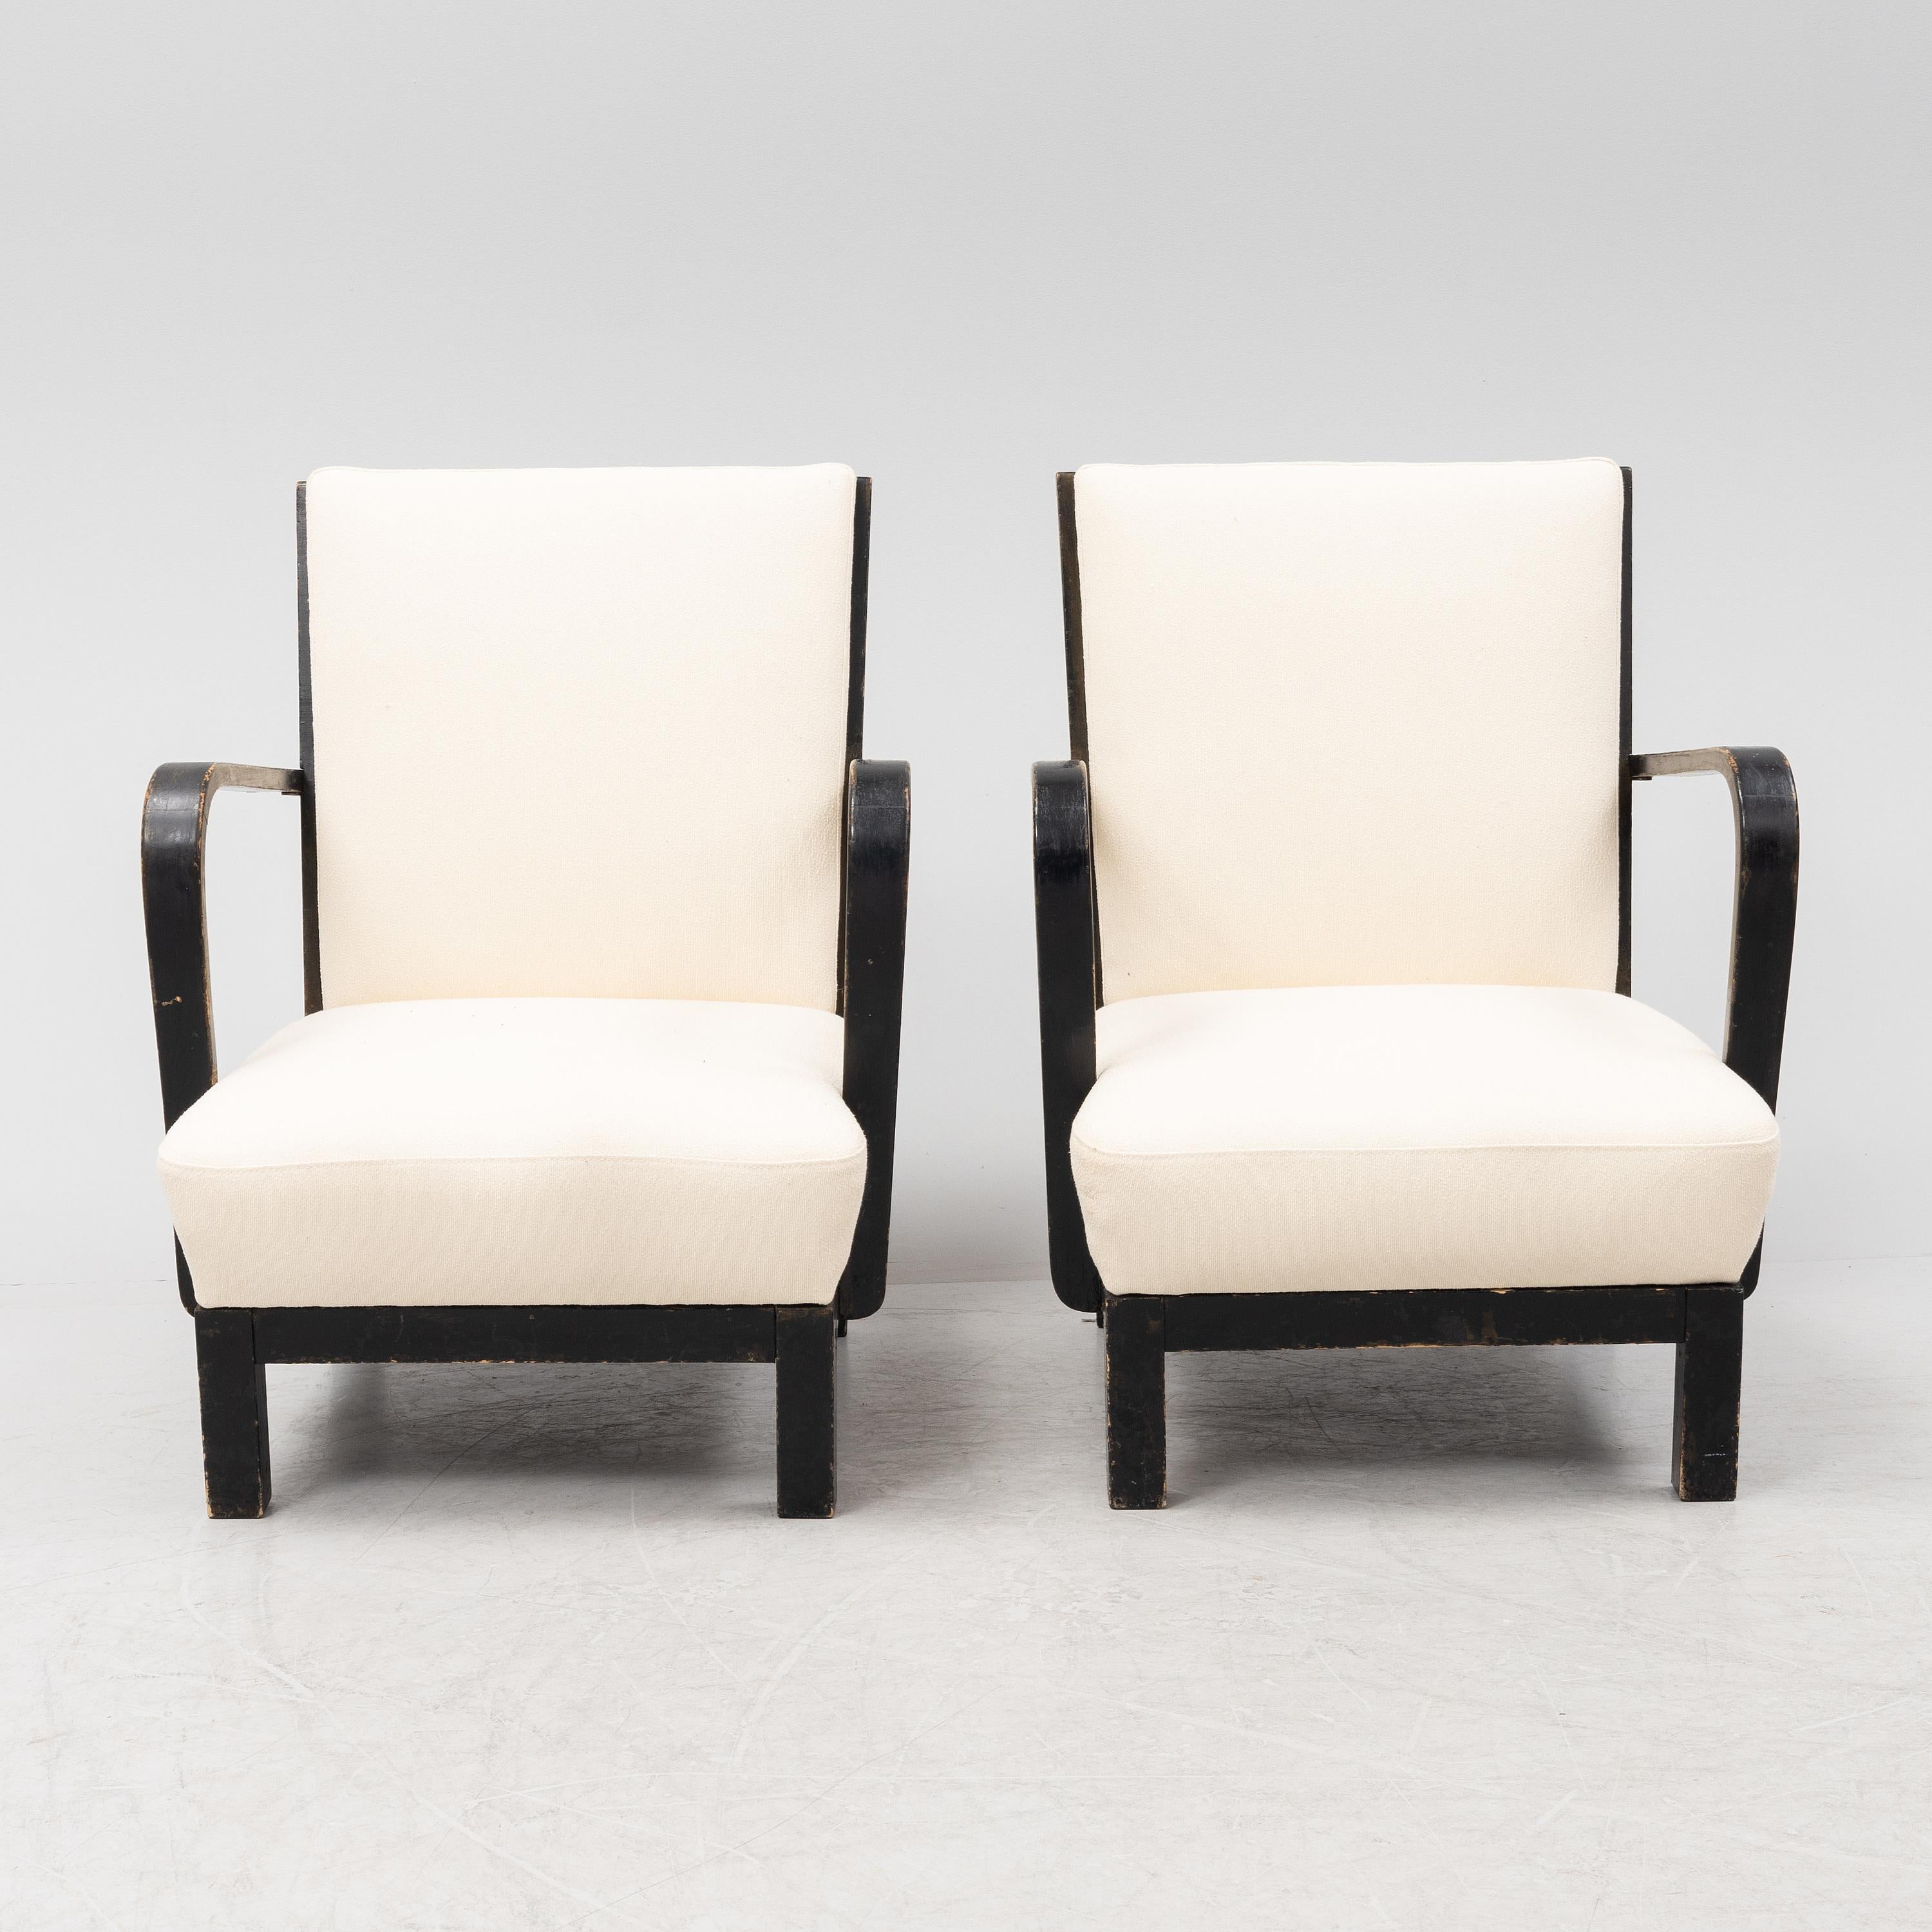 Scandinavian Modern Art Deco Finnish Lounge Chairs, Ivory Boucle, Made by Asko, Finland 1935 For Sale